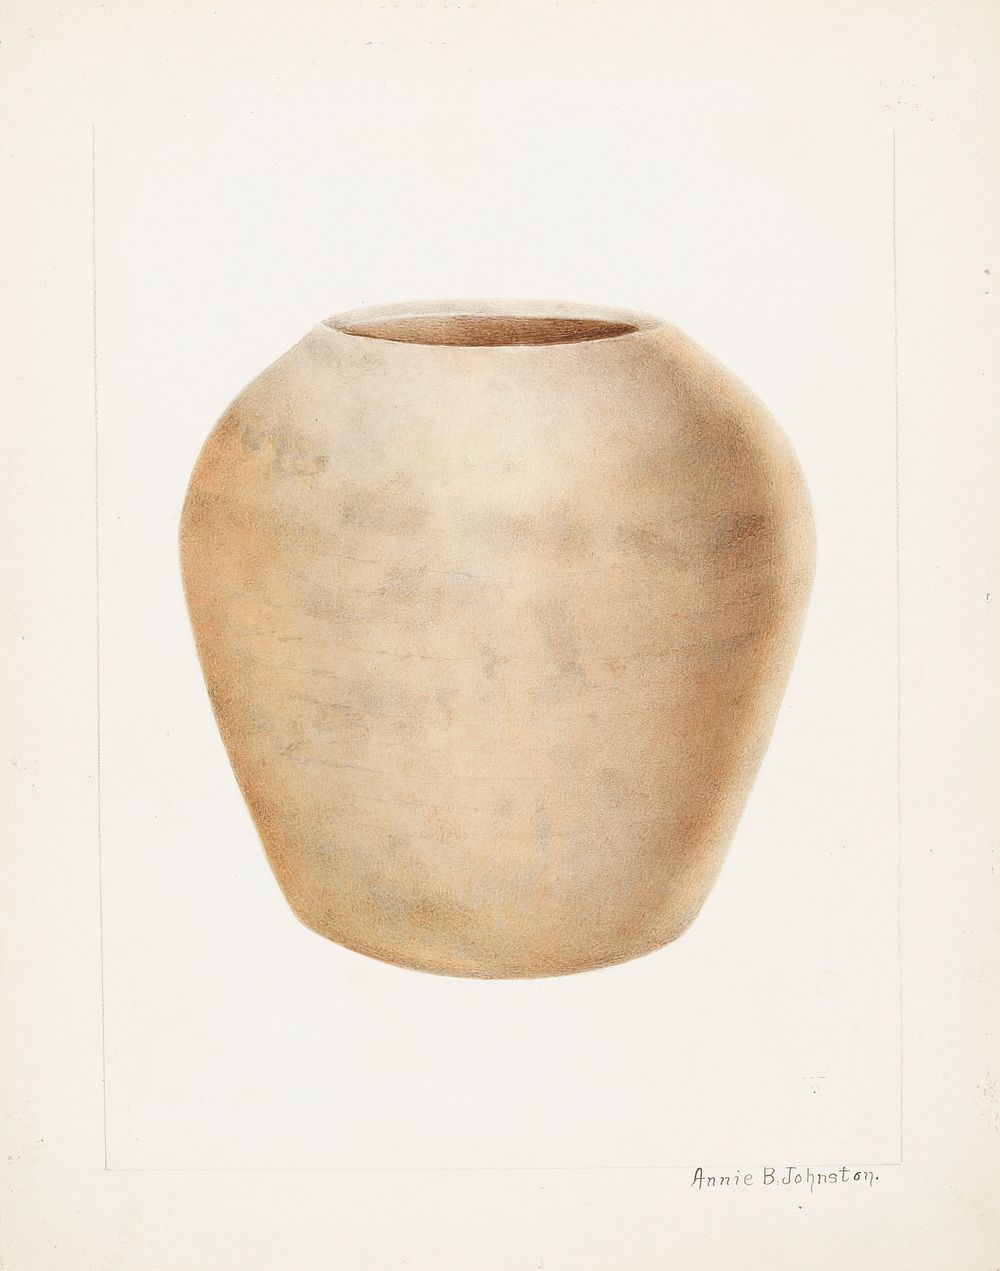 Stoneware Flower Pot (ca.1937) by Annie B. Johnston. Original from The National Galley of Art. Digitally enhanced by…